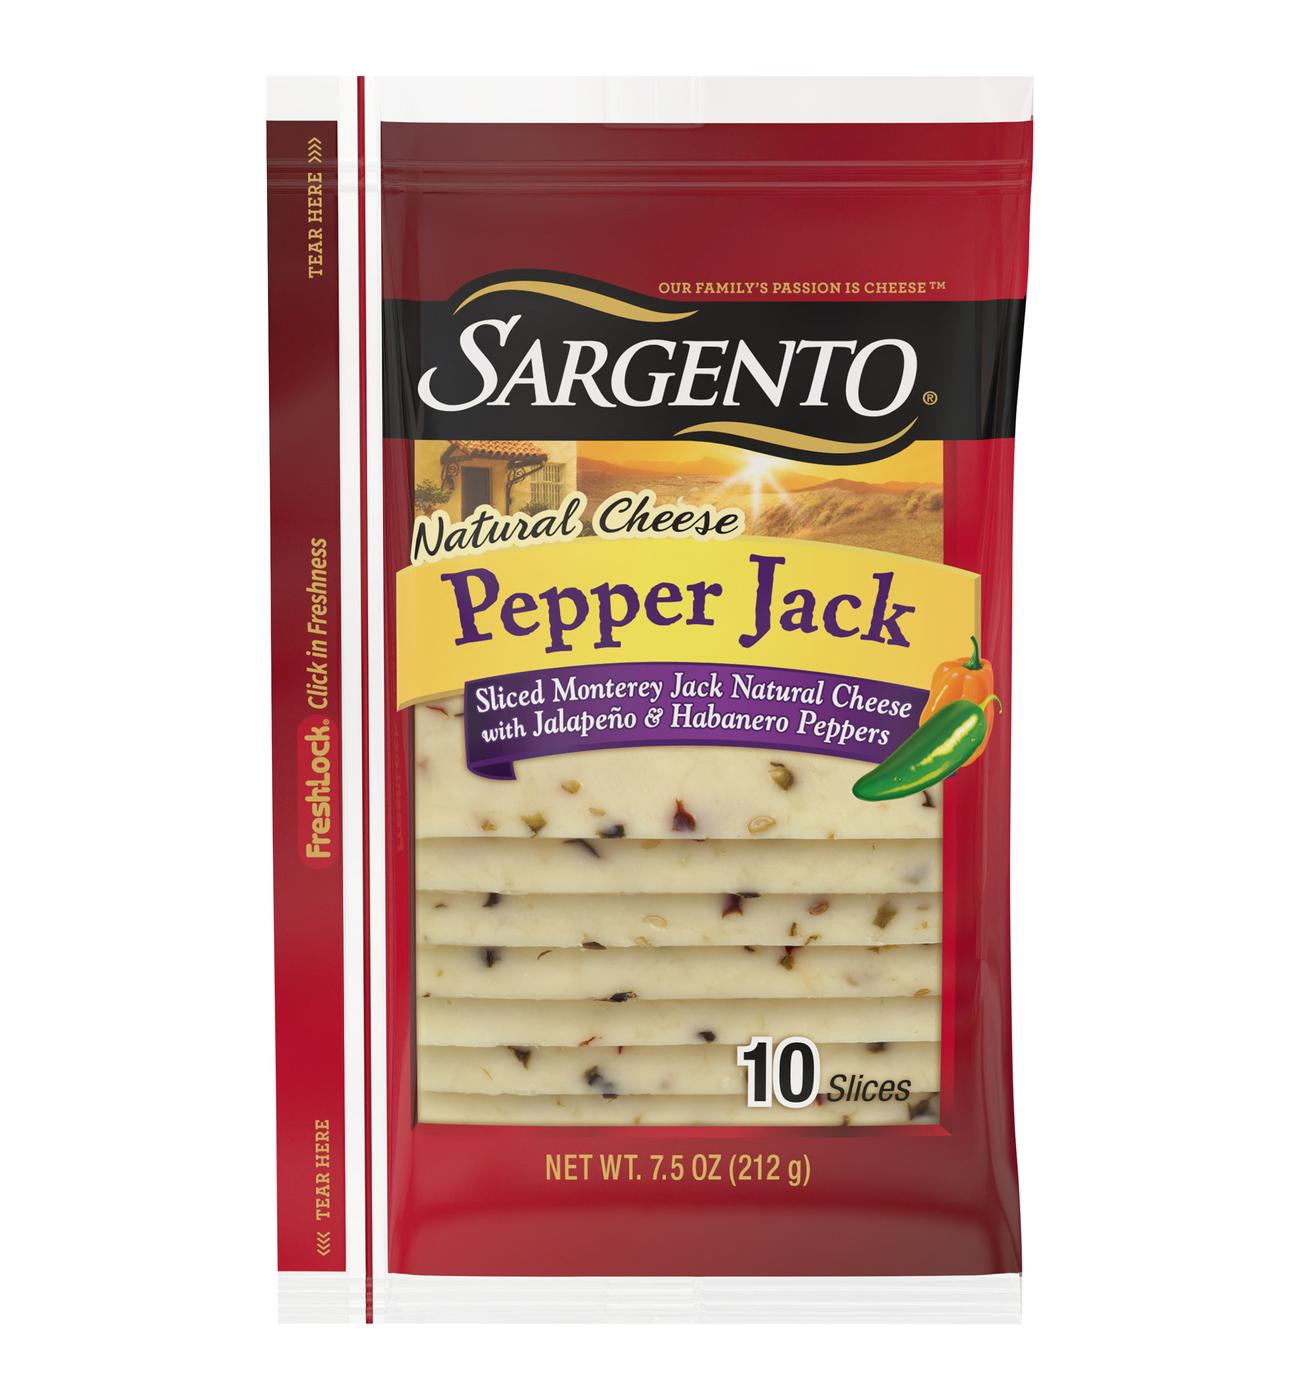 SARGENTO Pepper Jack Sliced Cheese; image 1 of 2